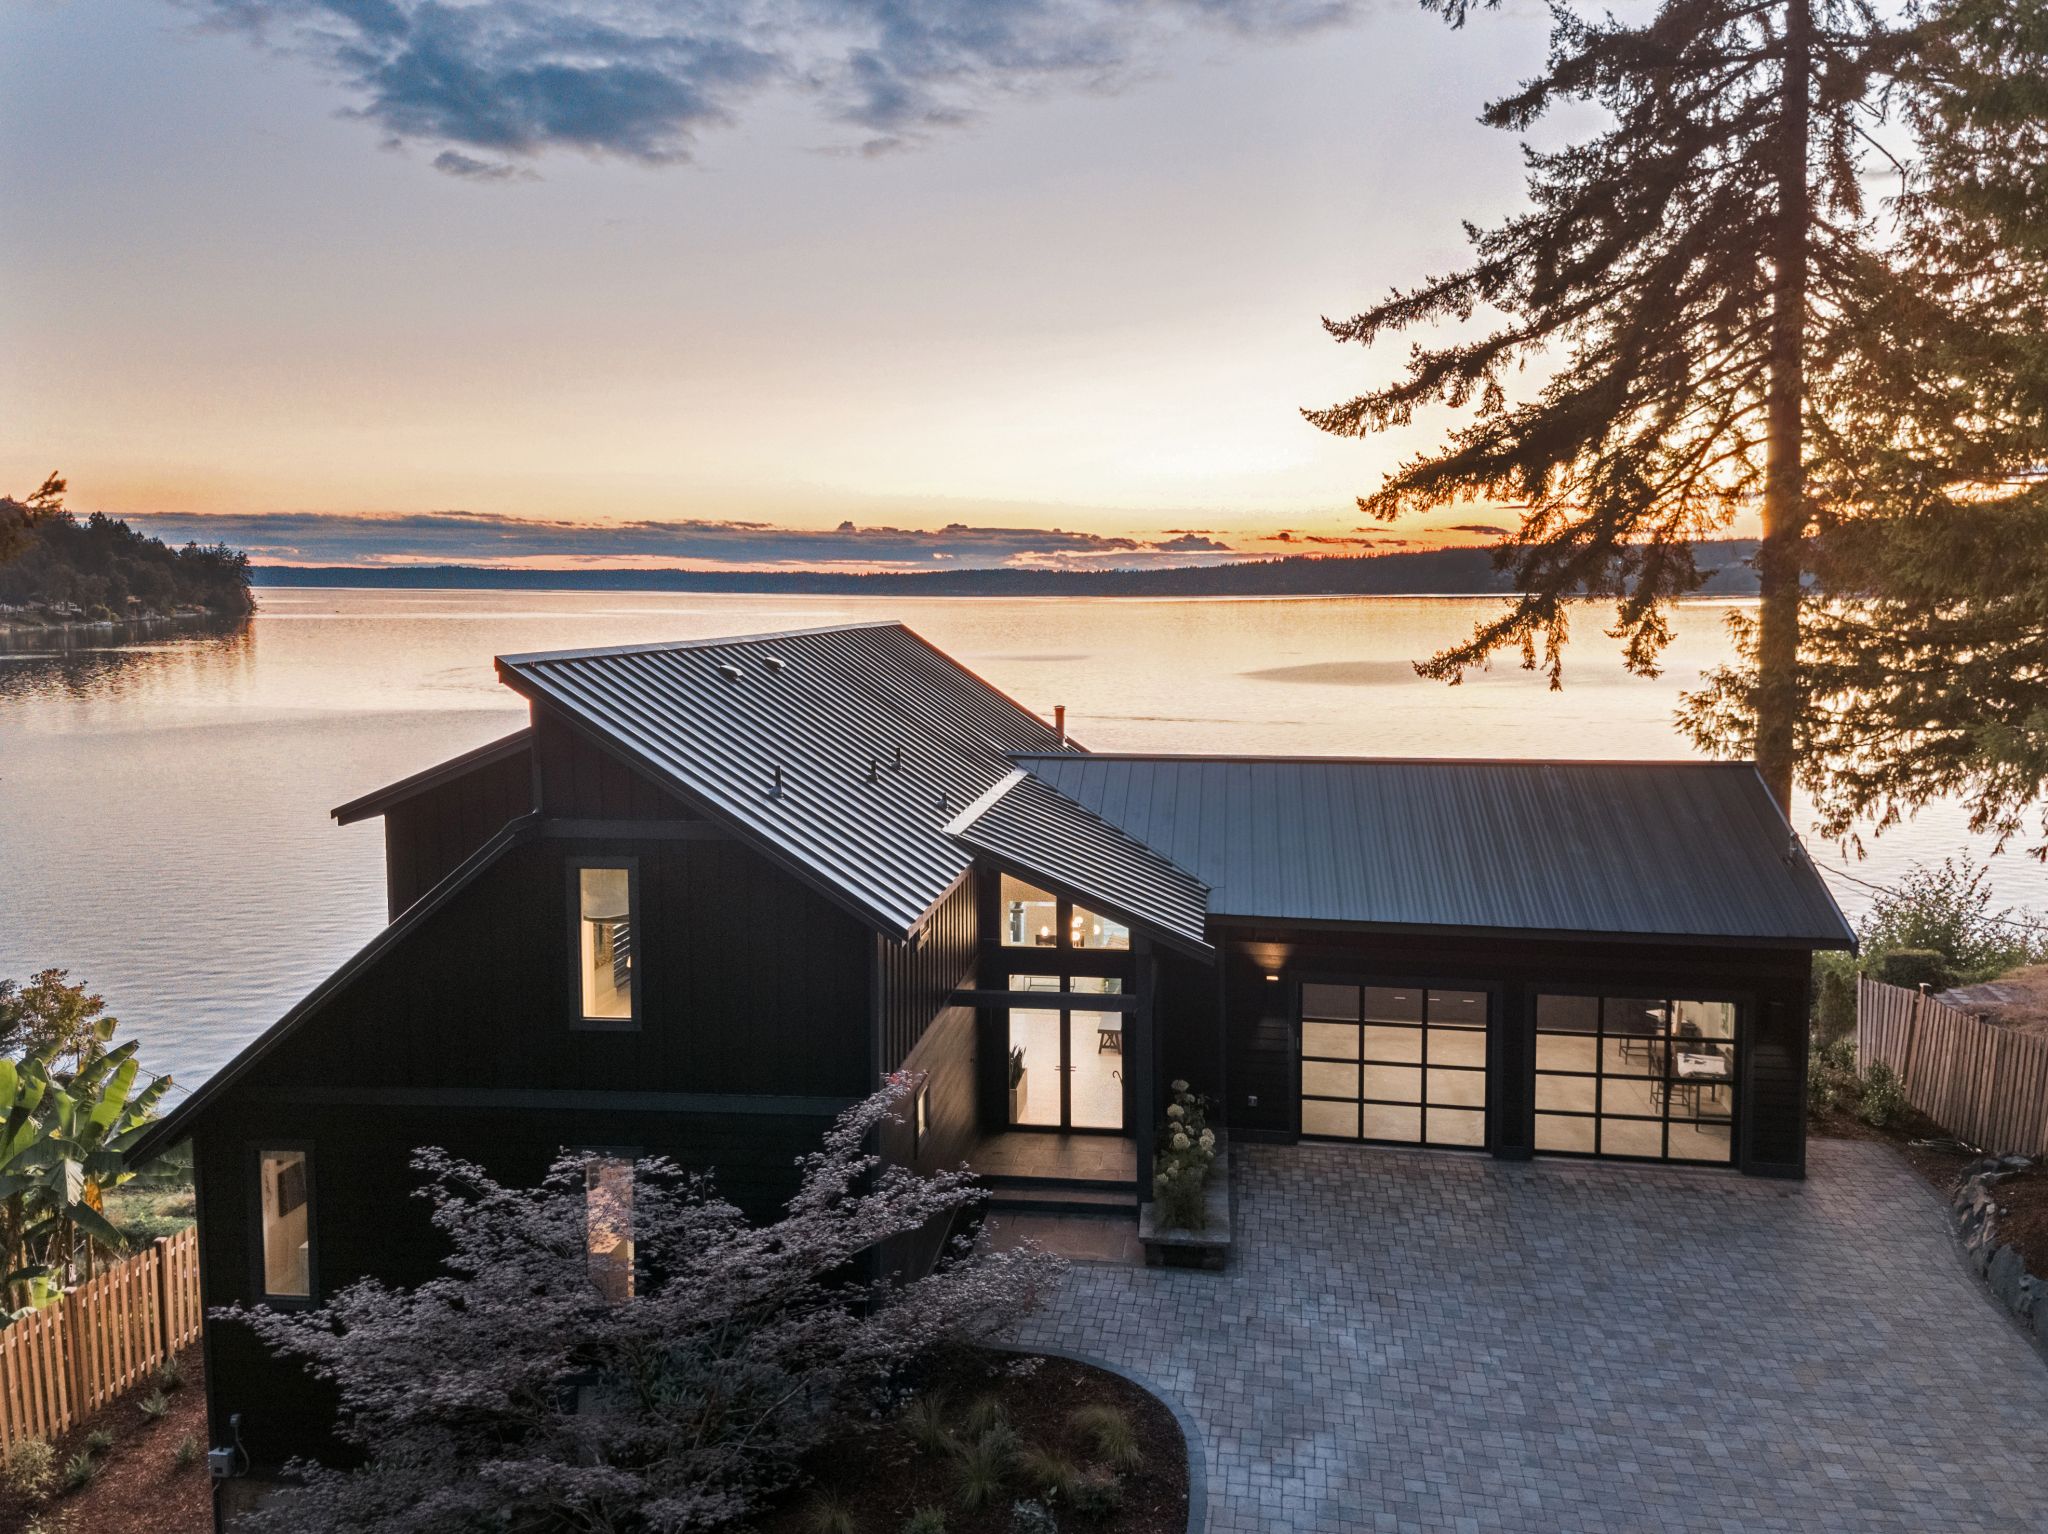 Take a peek inside HGTV's 2018 Dream Home, located in the Pacific Northwest